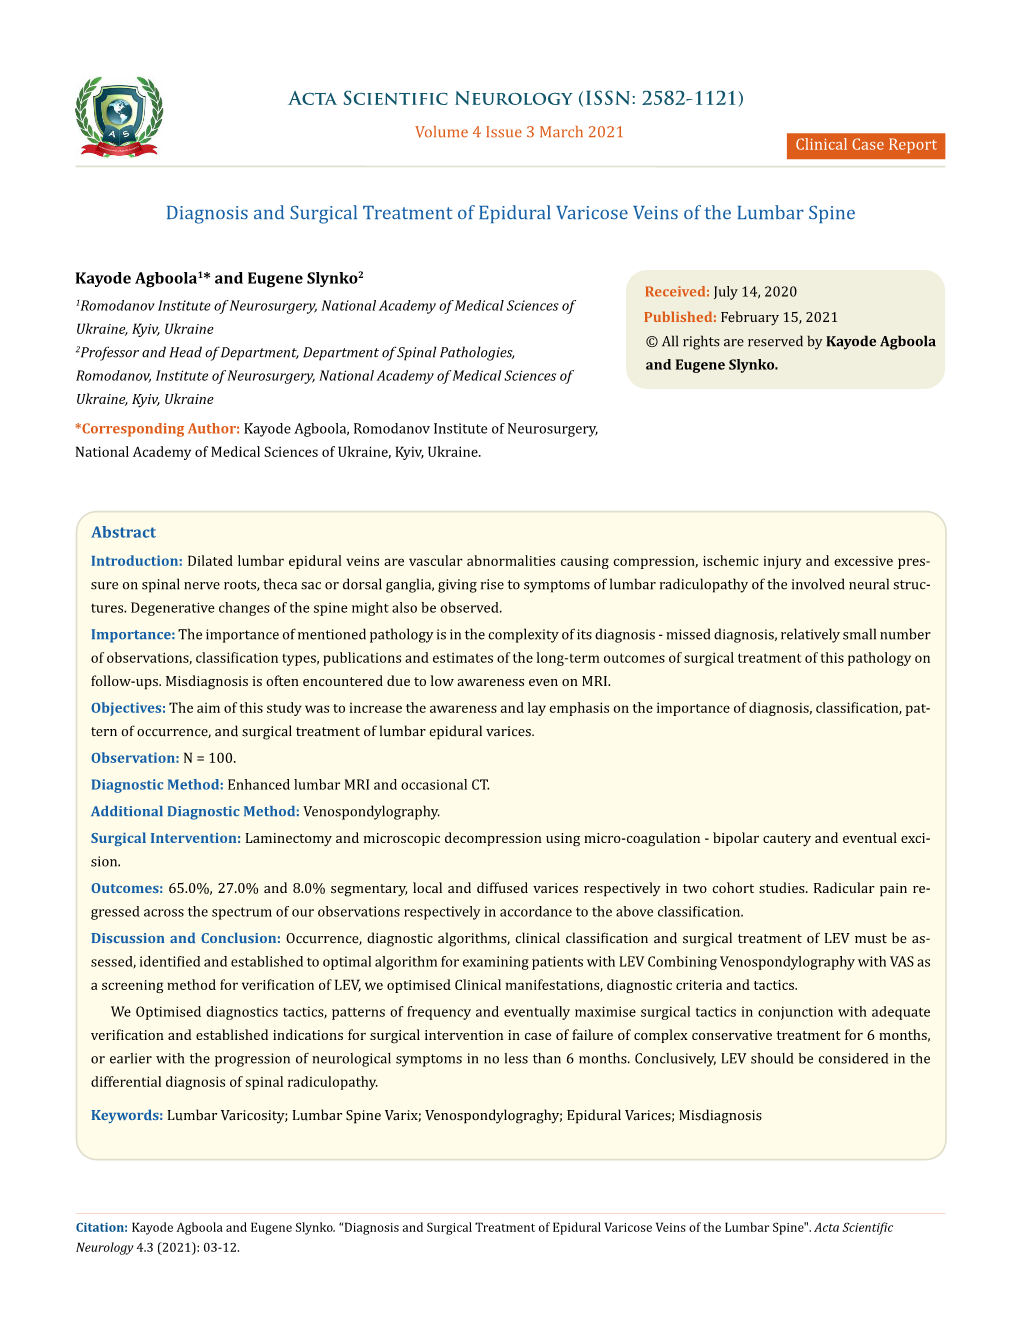 Diagnosis and Surgical Treatment of Epidural Varicose Veins of the Lumbar Spine